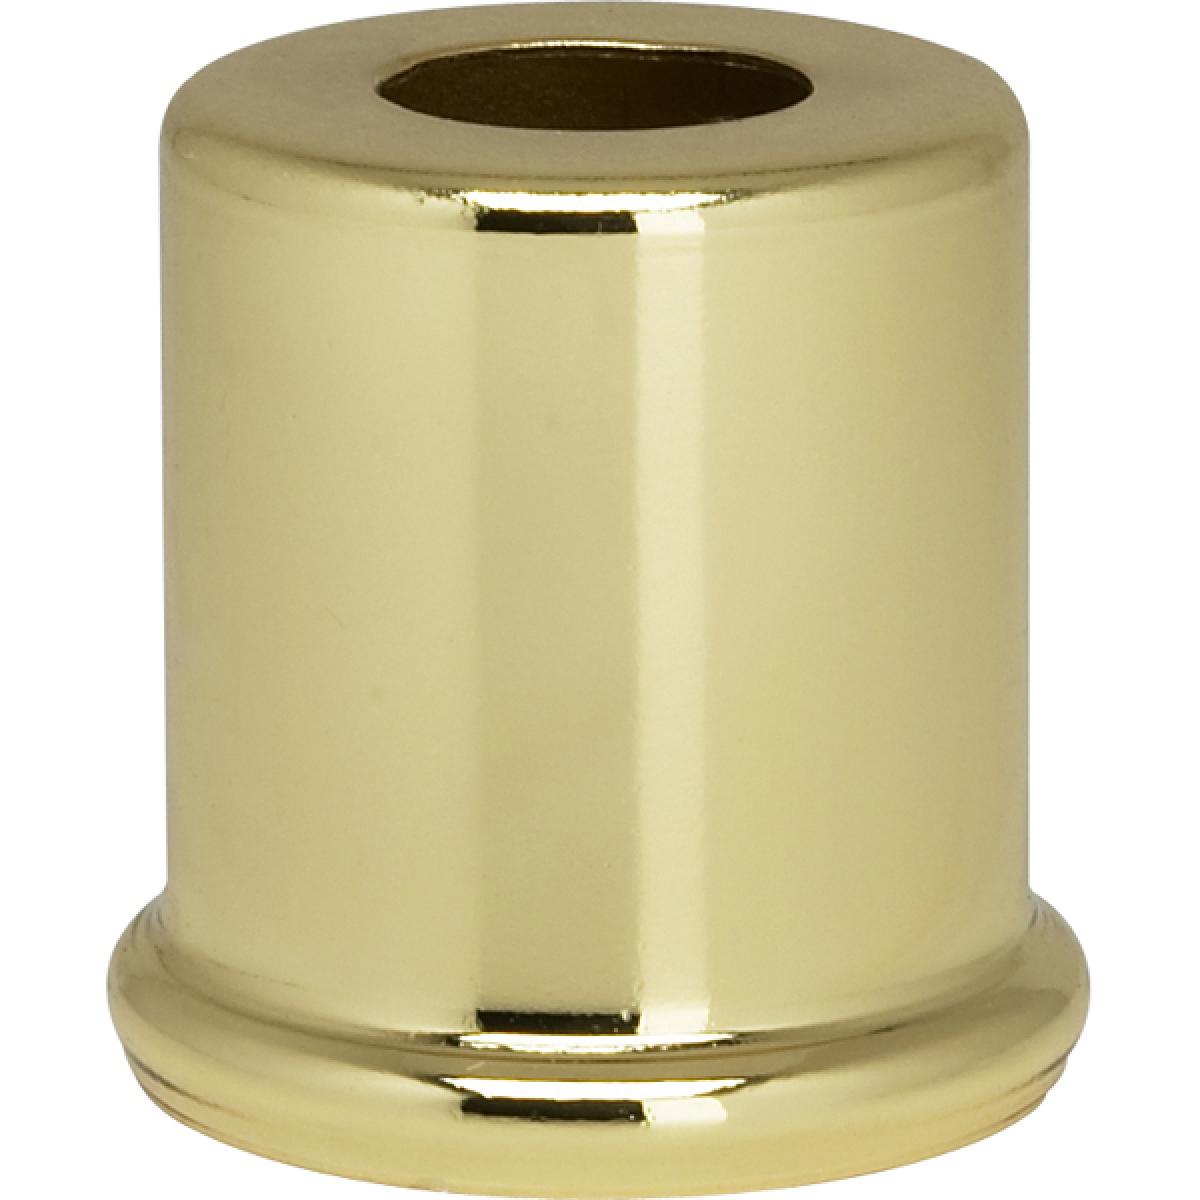 Satco 90-2277 Steel Spacer 7/16" Hole 1" Height 7/8" Diameter 1" Base Diameter Brass Plated Finish